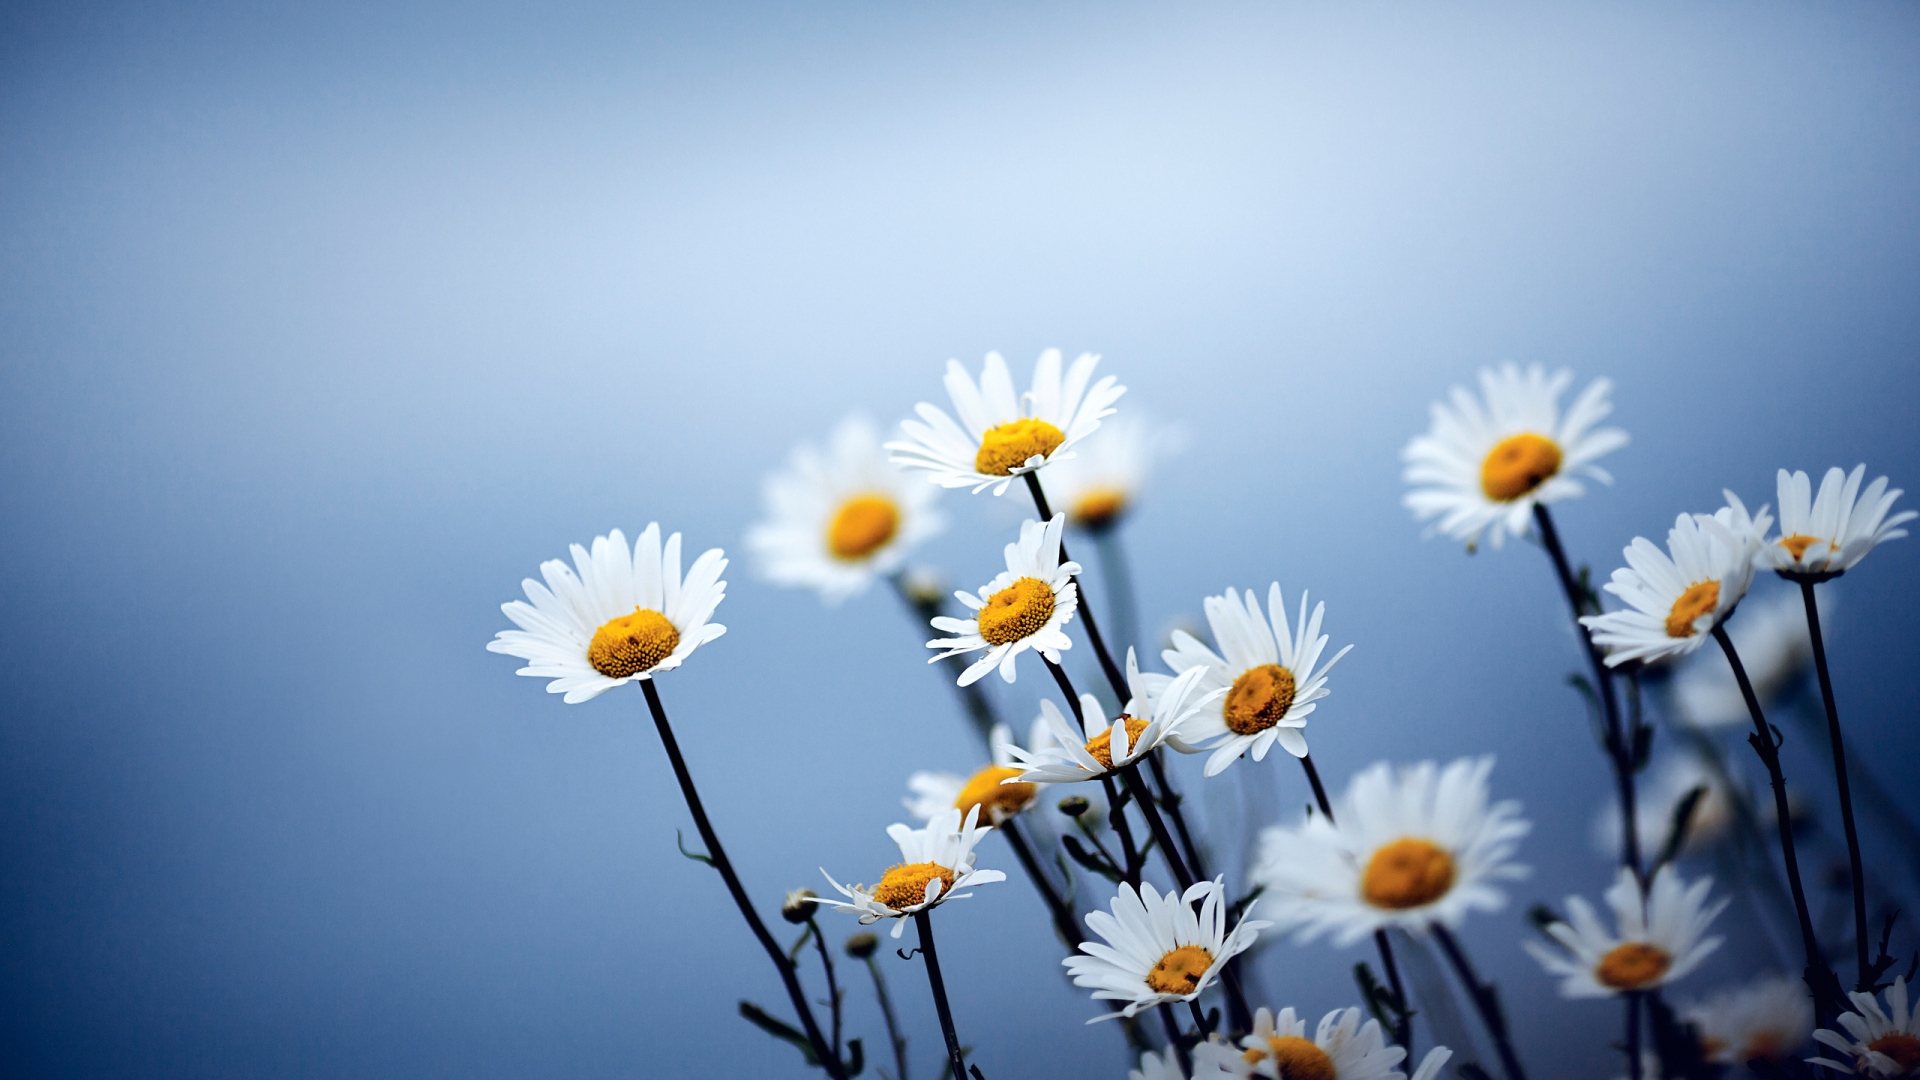 Cute Daises Flowers for 1920 x 1080 HDTV 1080p resolution